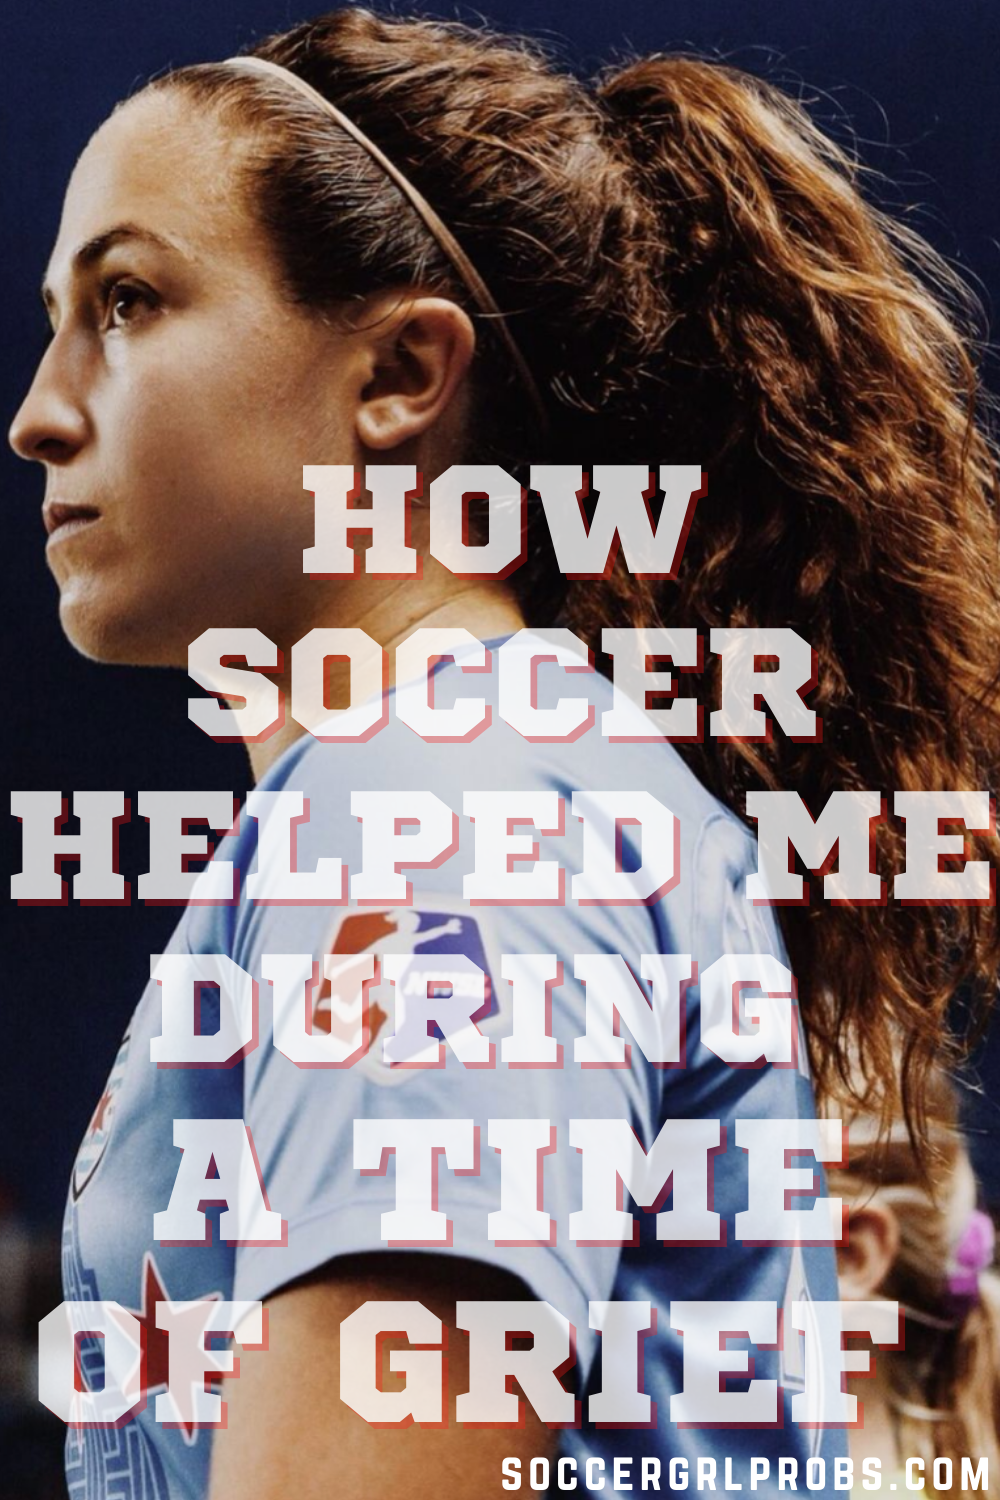 “How Soccer Helped Me During a Time of Grief” by Danny Colaprico